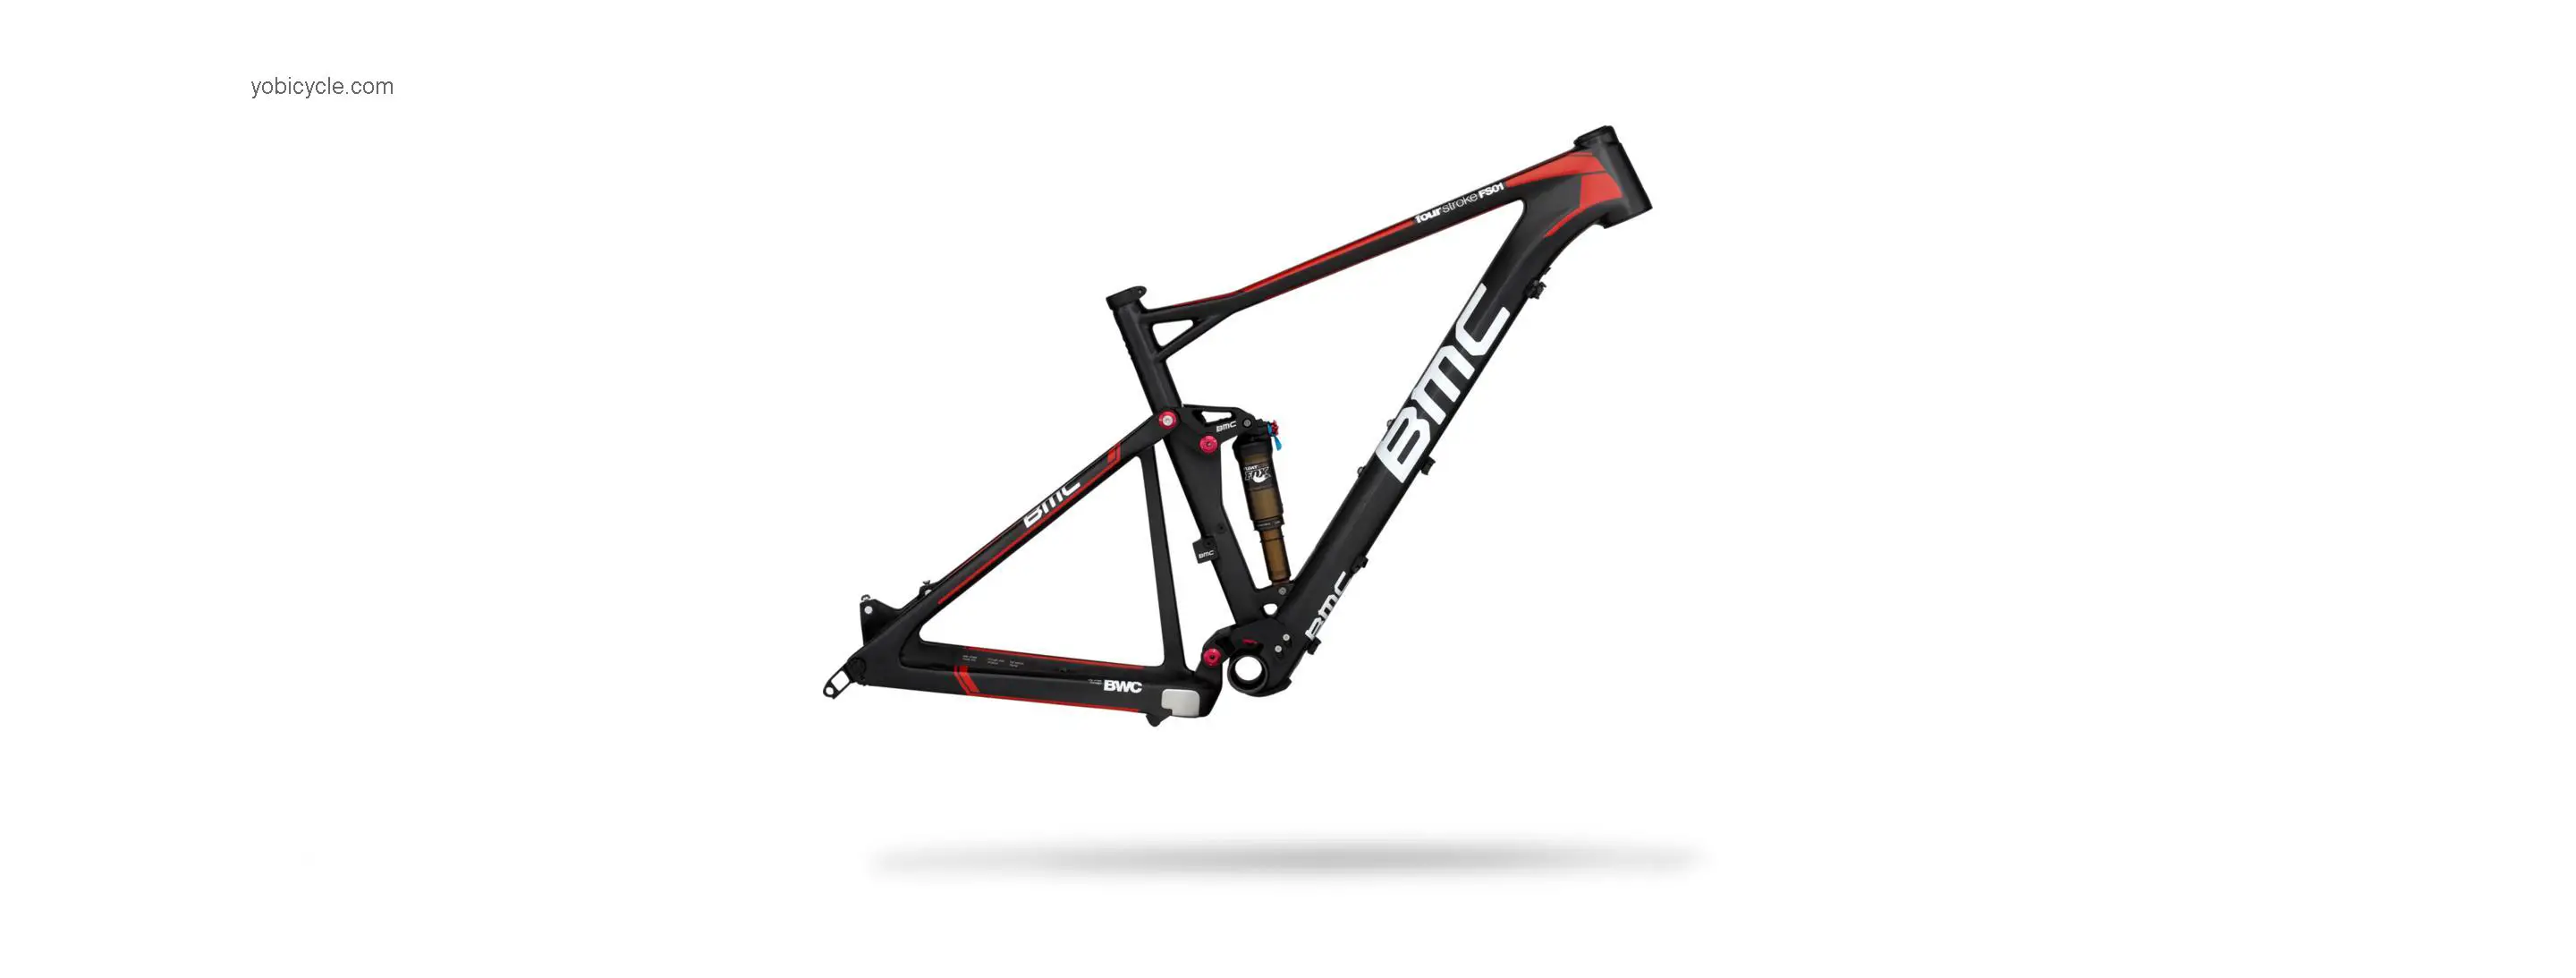 BMC Fourstroke FS01 29 Frameset competitors and comparison tool online specs and performance